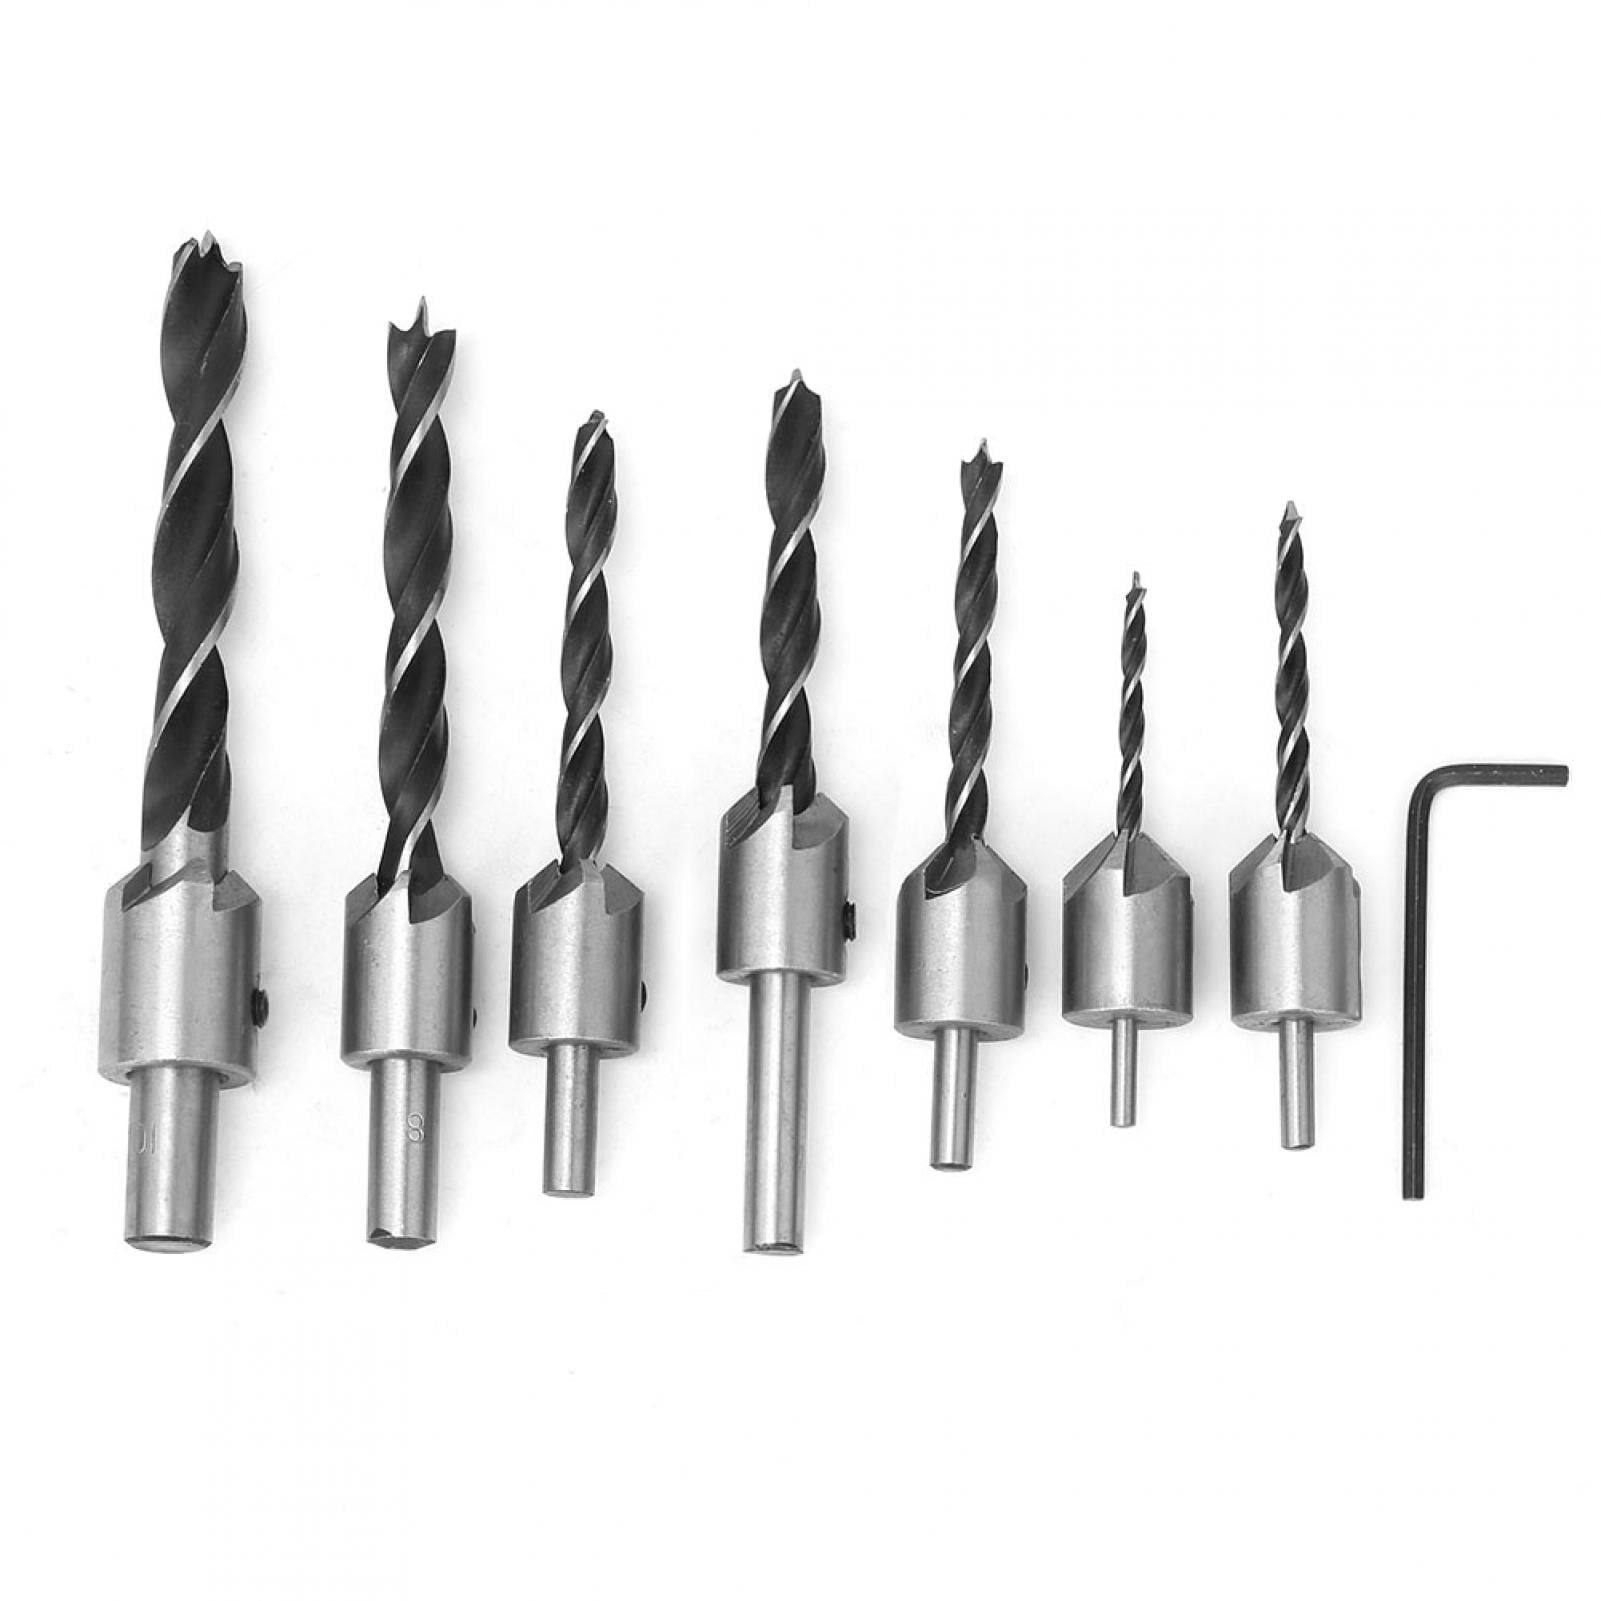 7PCS Drill Bits Set High Speed Steel Drill Bits Woodworking Chamfering Counter Bits Wood Drill Set with A Case and One Hex Key Wrench for Woodworking Countersink Drill Bit 3-10mm 